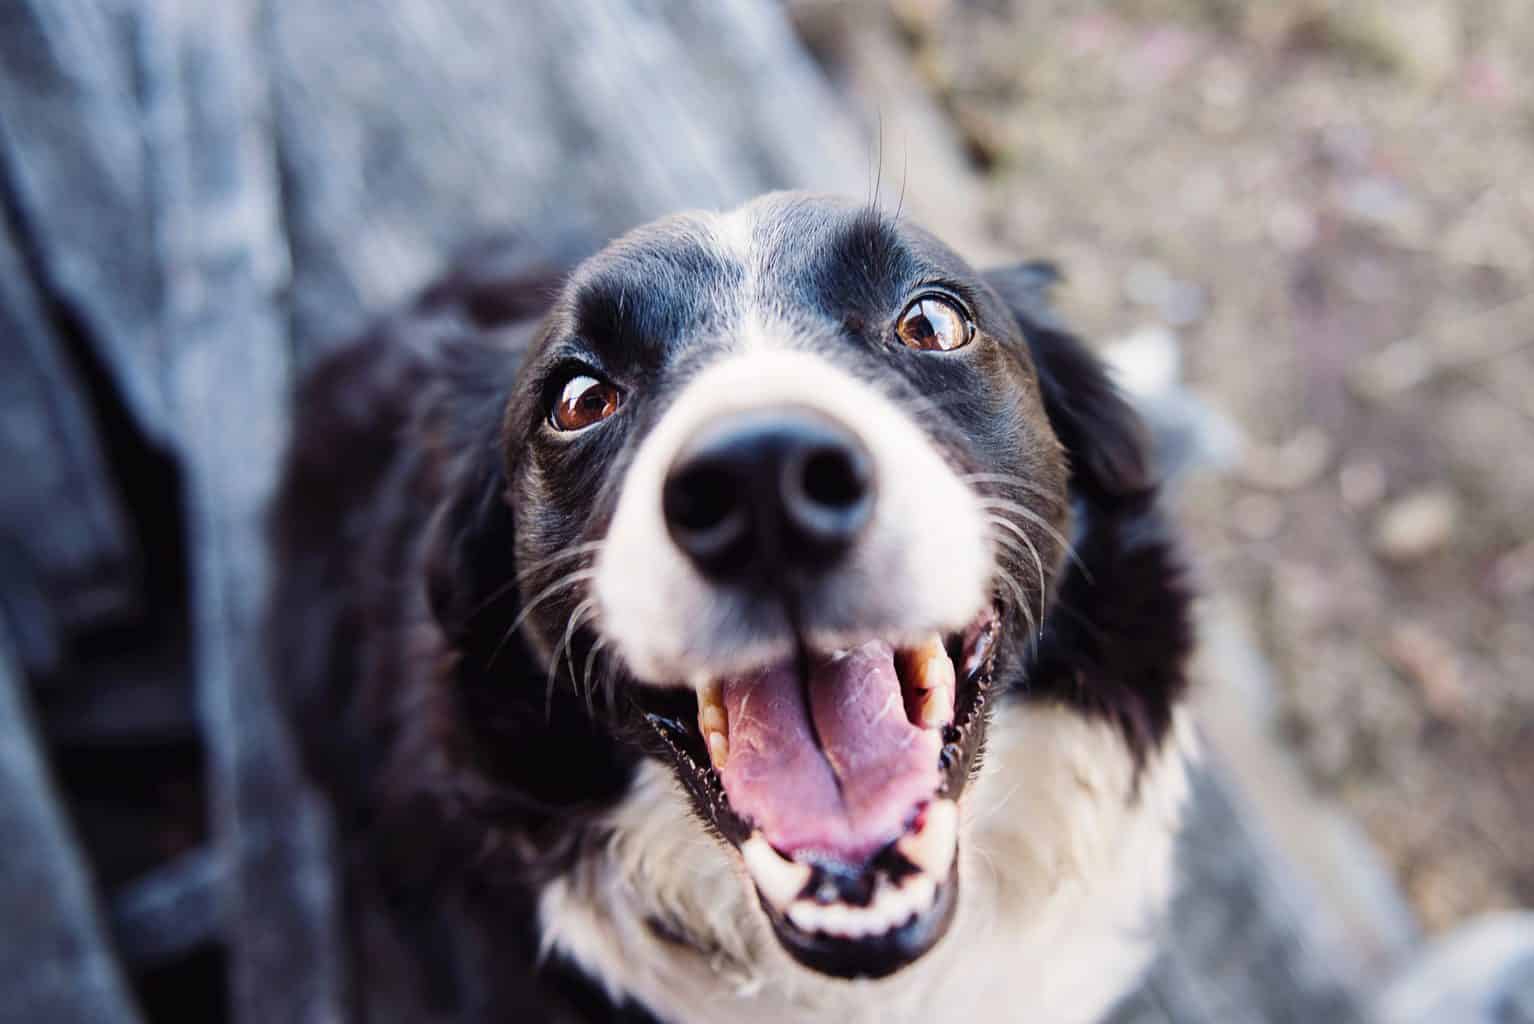 Excited looking dog